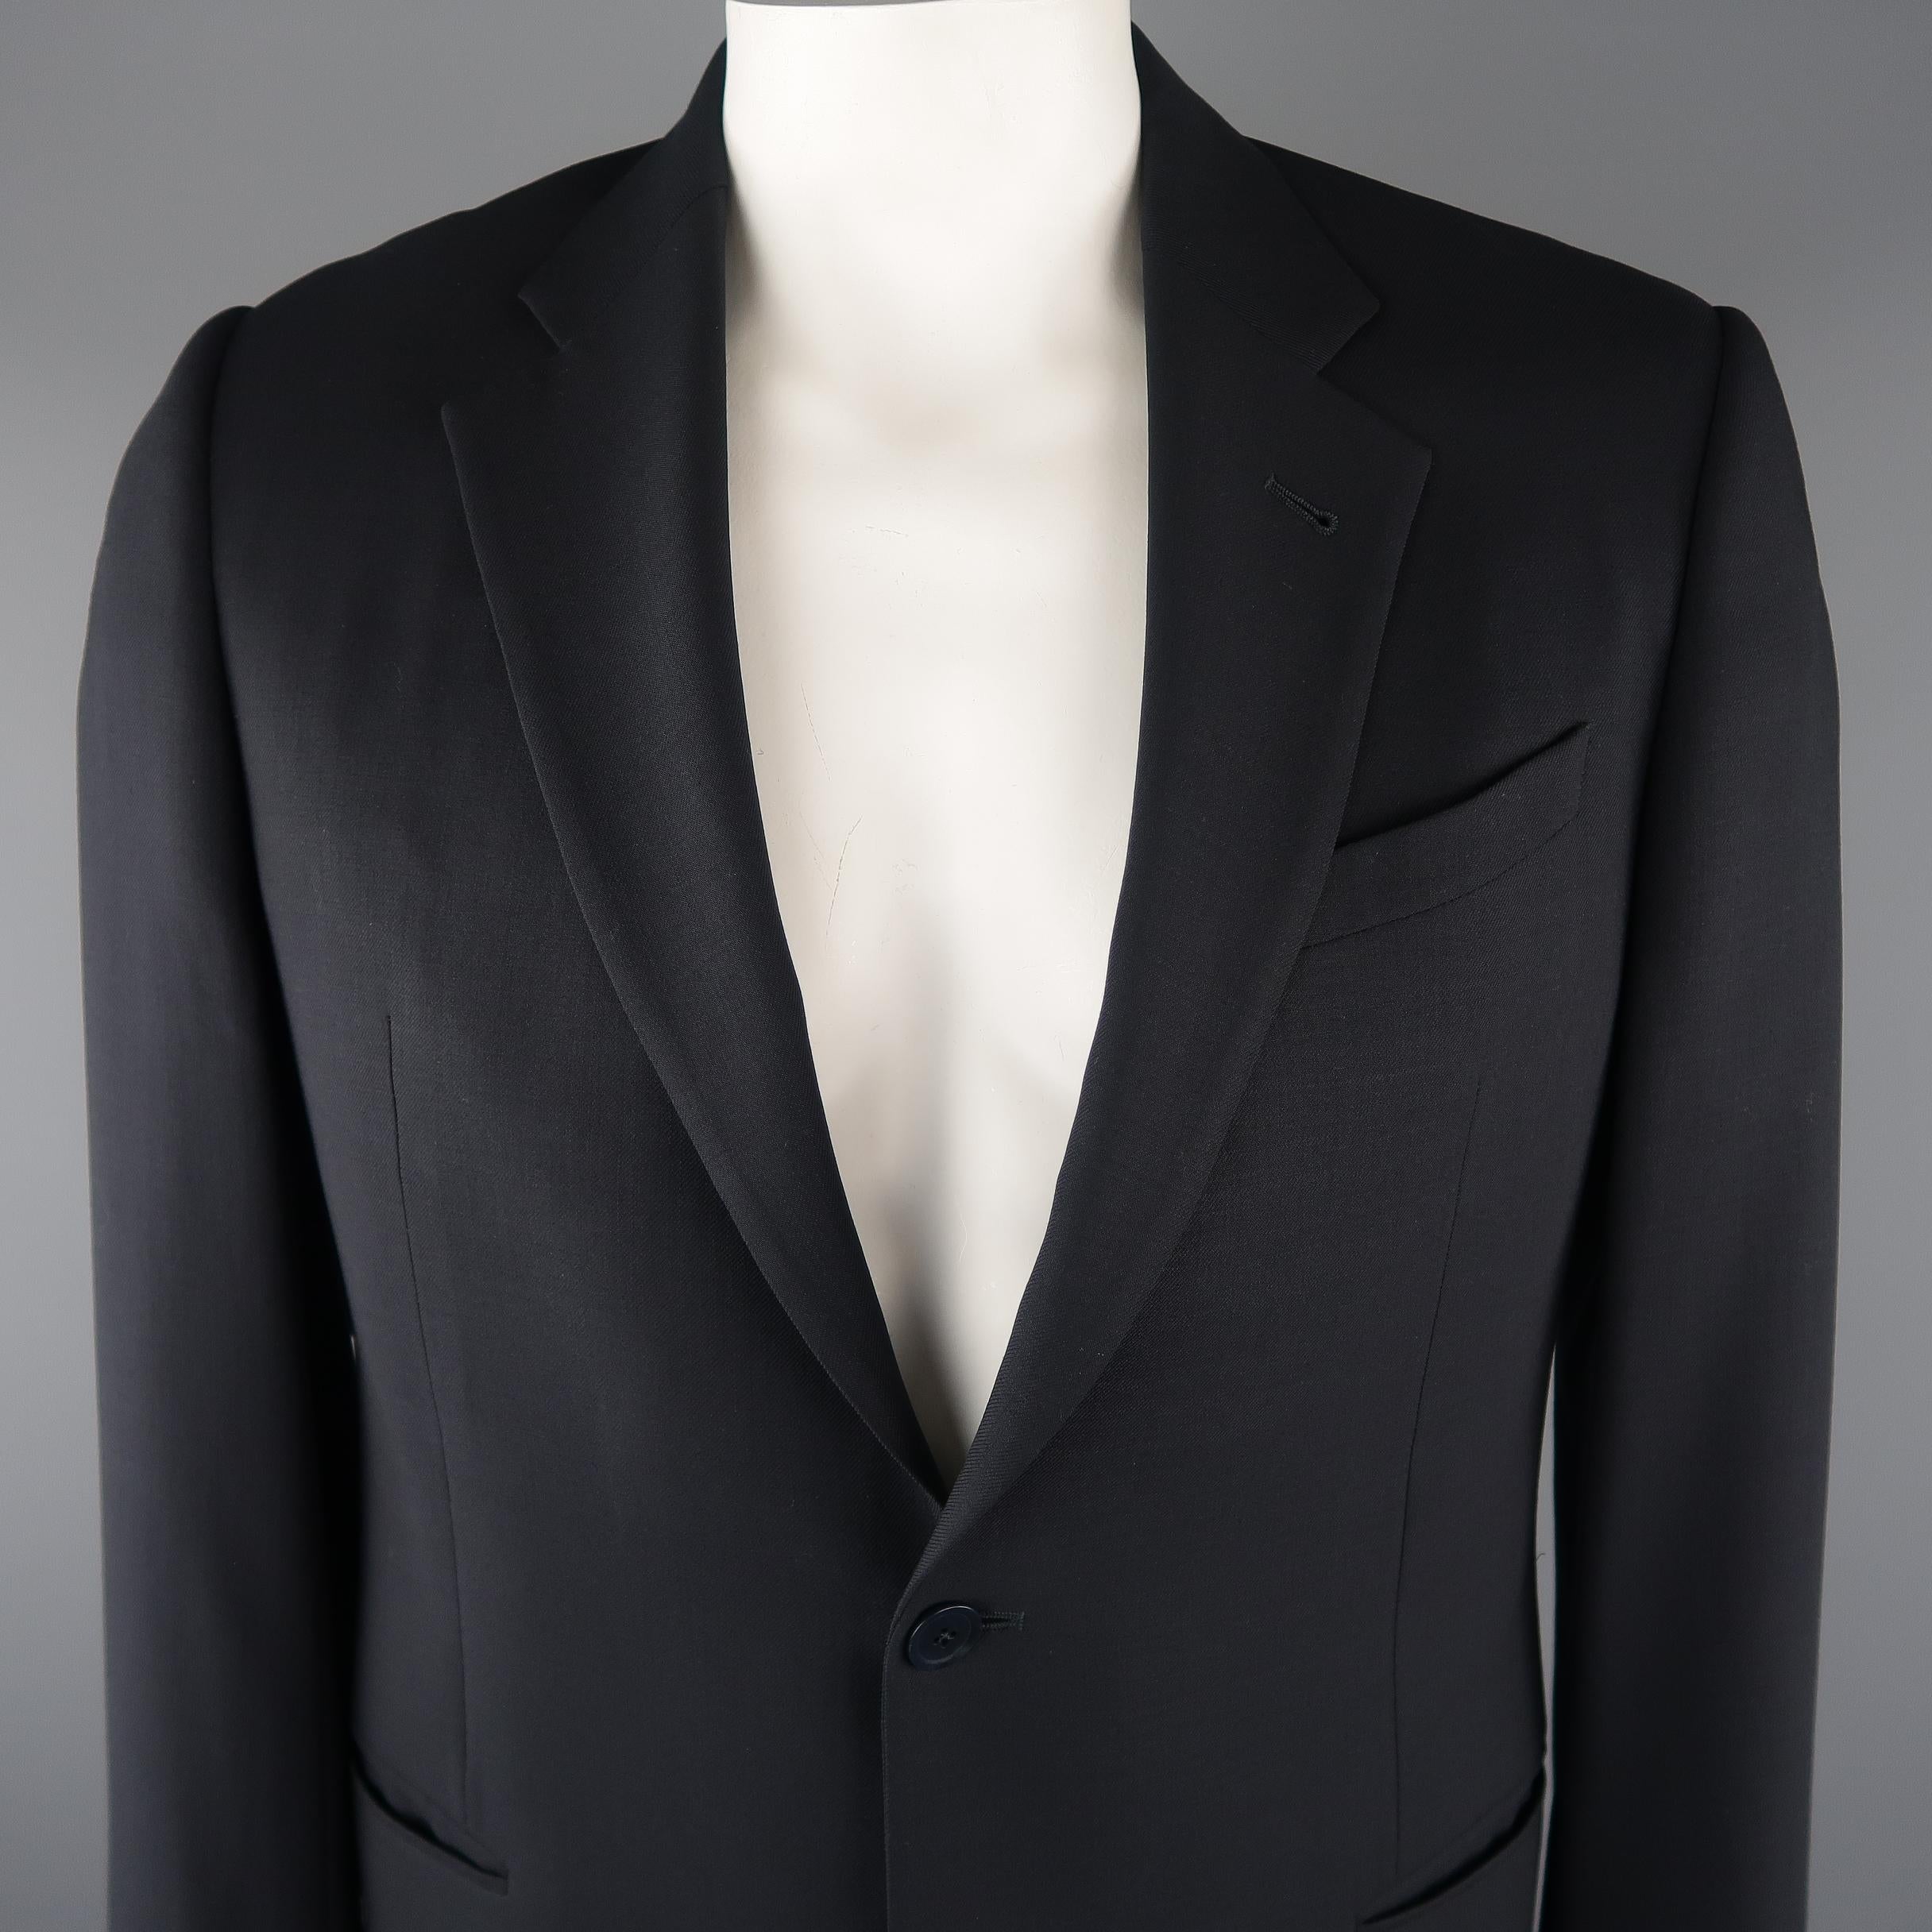 ARMANI COLLEZIONI classic sport coat come in navy tone in solid wool material, with a notch lapel, slit pockets, double vent on the back hem, two button closure, single breasted. Made in Italy.
 
Excellent Pre-Owned Condition.
Marked: 42 R
